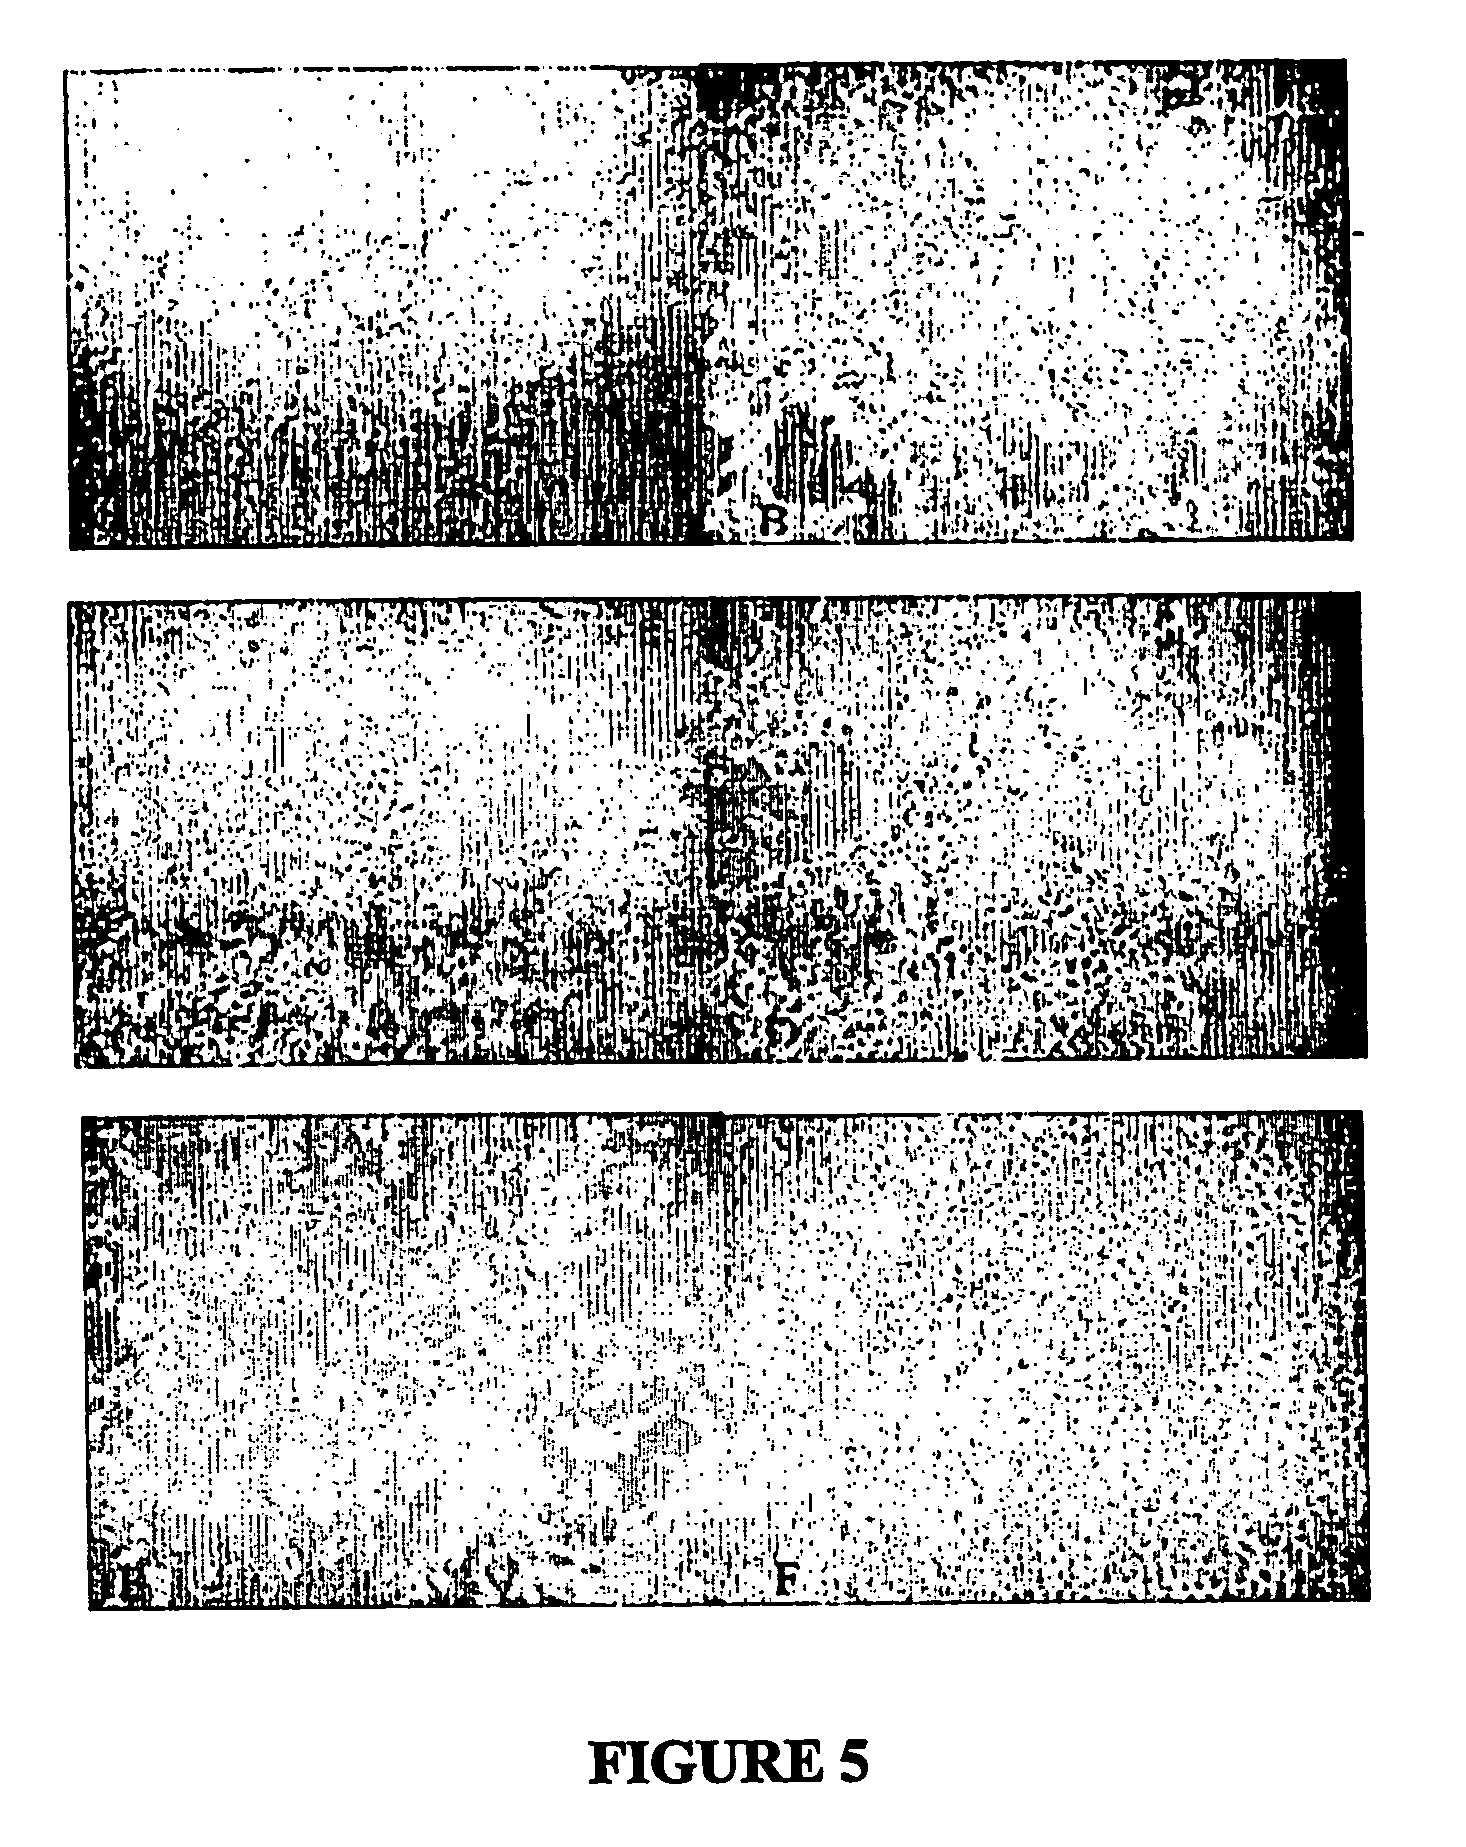 Thermosensitive polymers for therapeutic use and methods of preparation